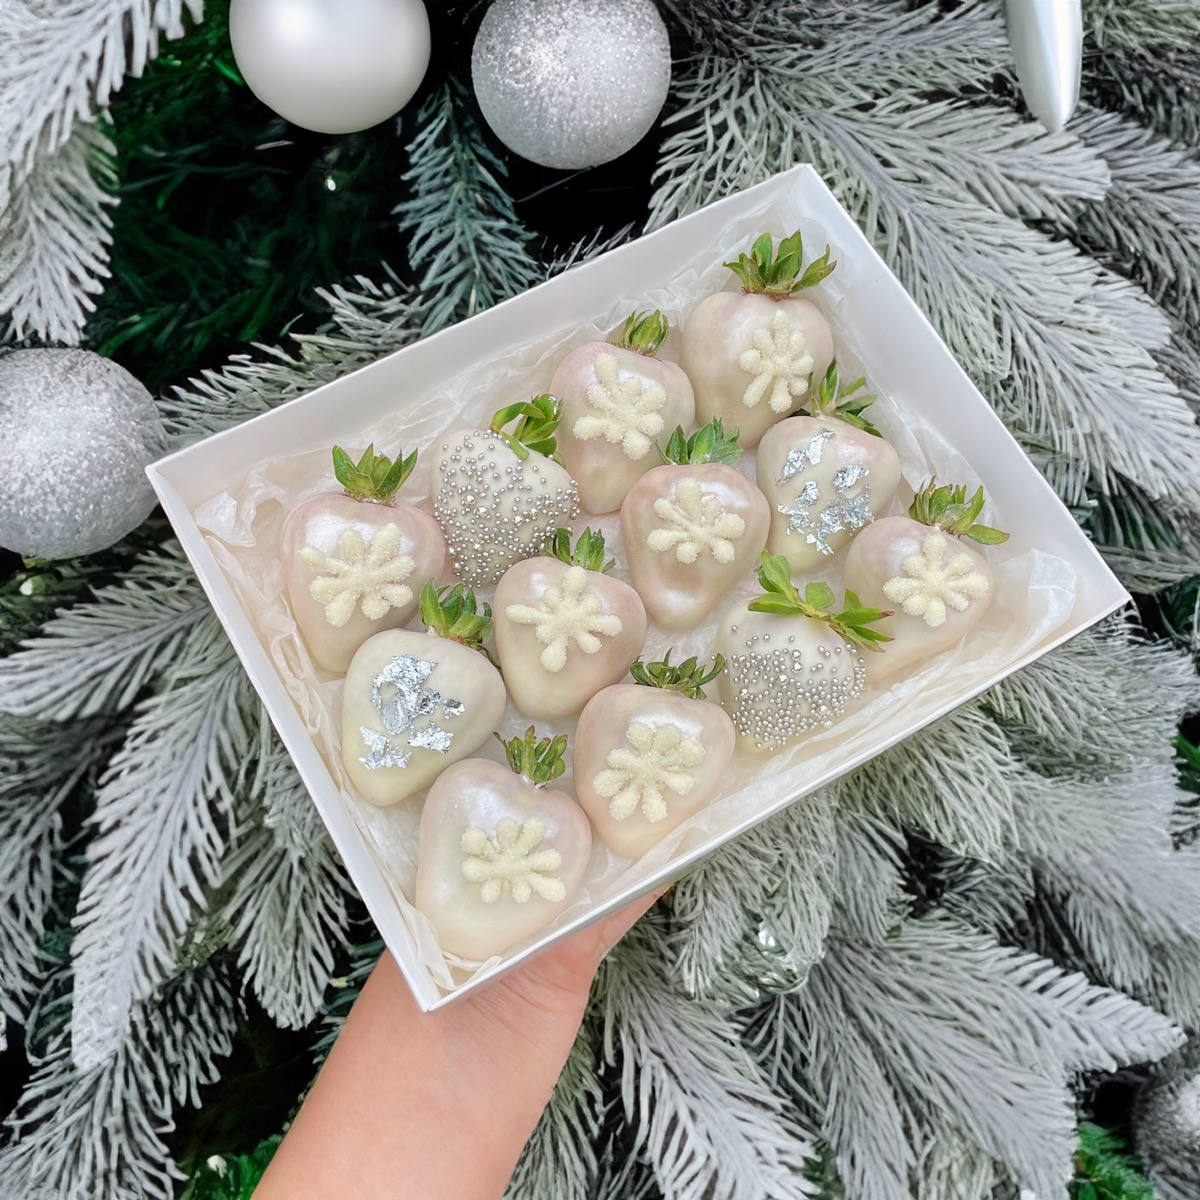 White Christmas chocolate gift, snowflakes and chocolate strawberries in the gift box